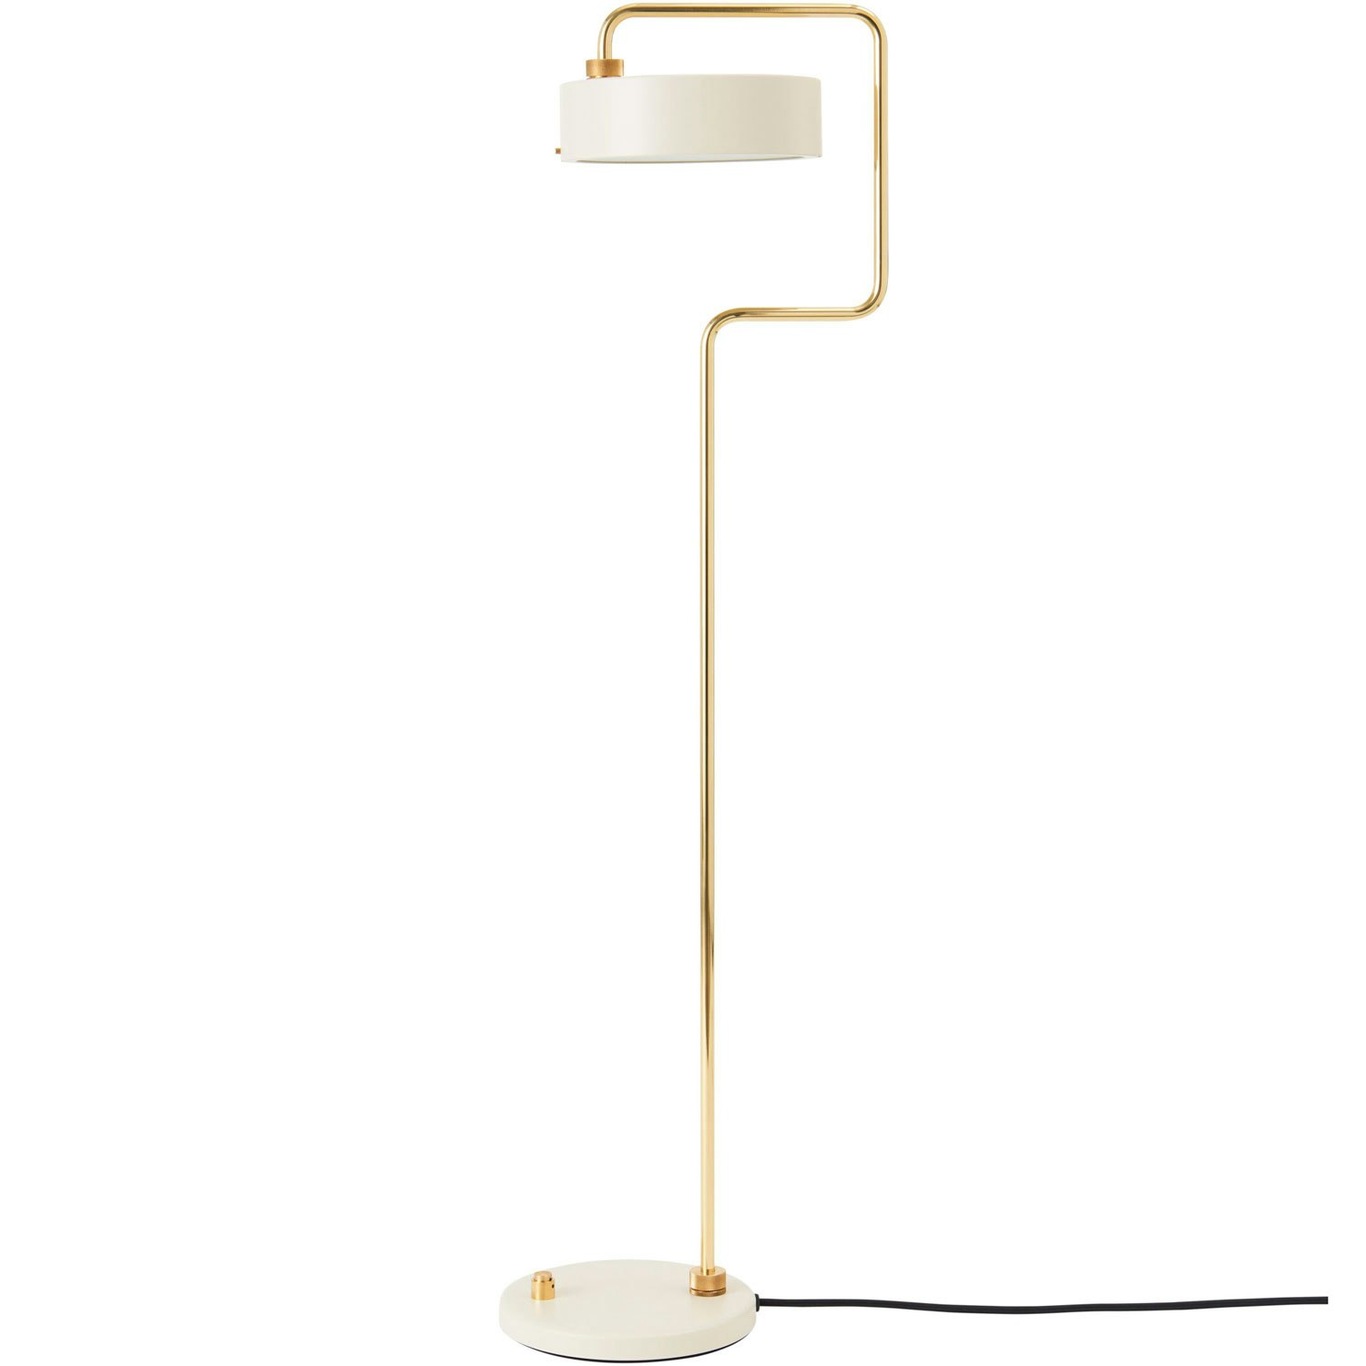 Petite Machine Stehlampe, Oyster White